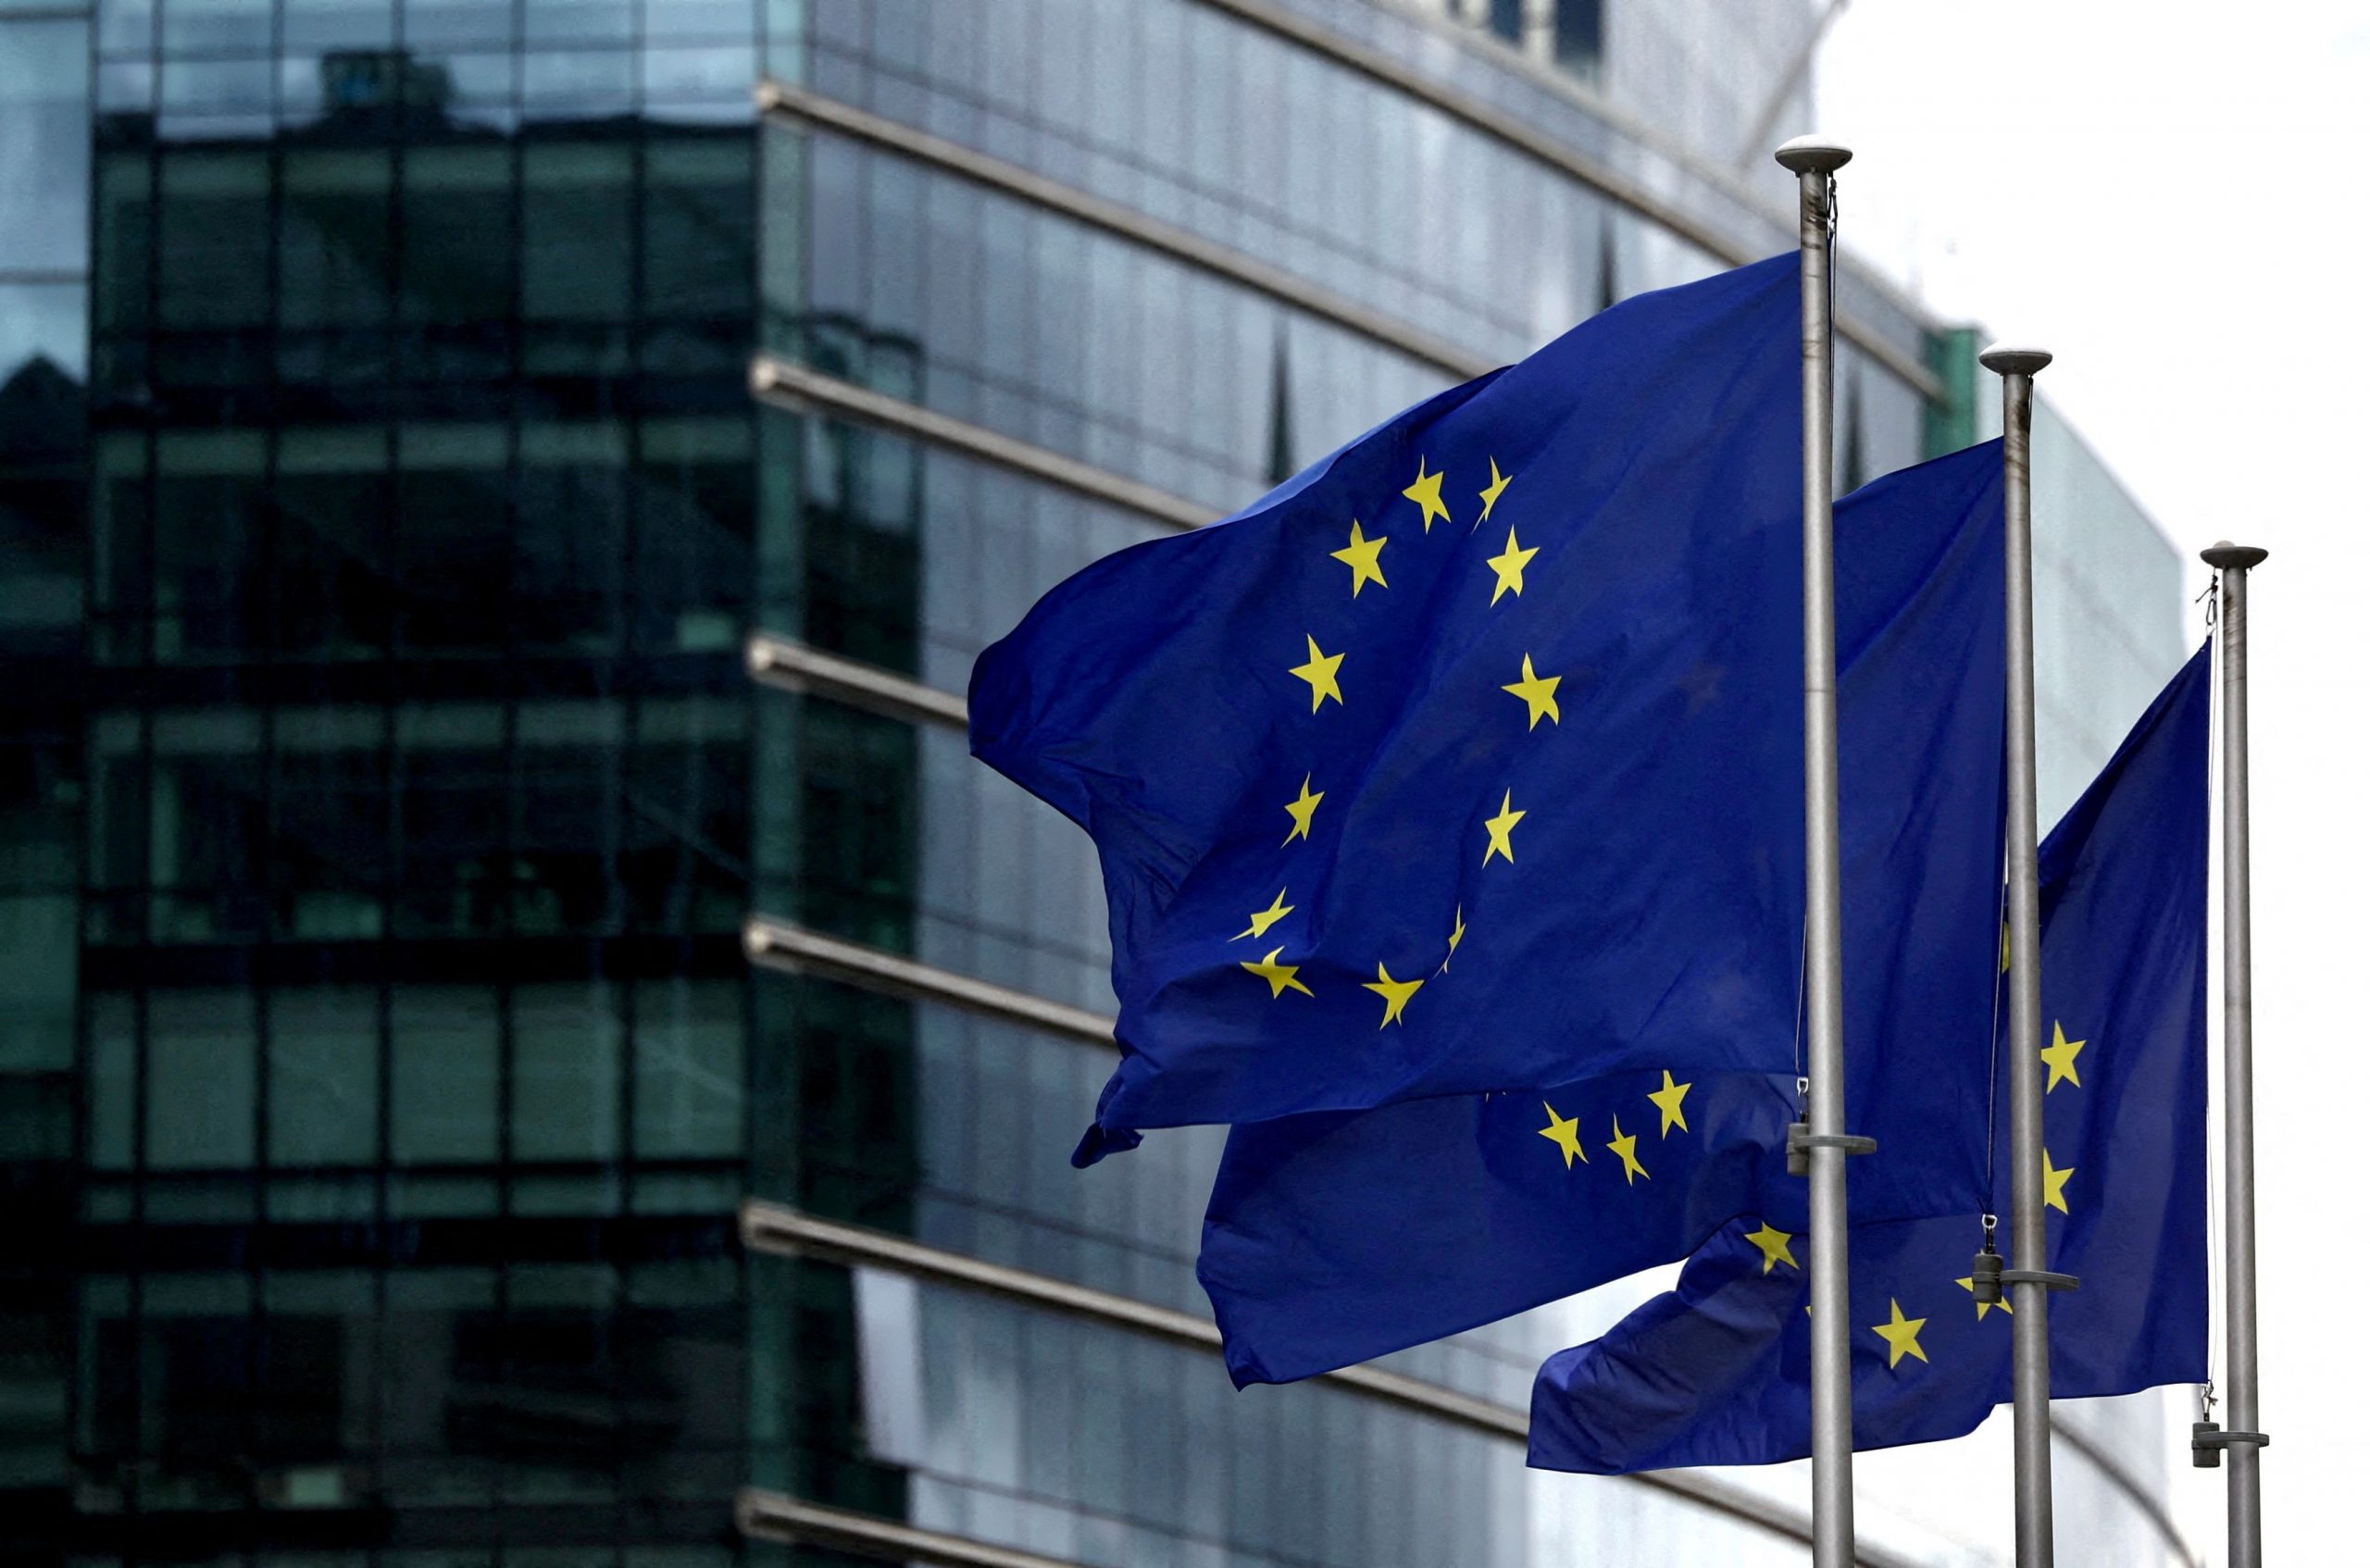 The European Commission Sets its Sights on Predator